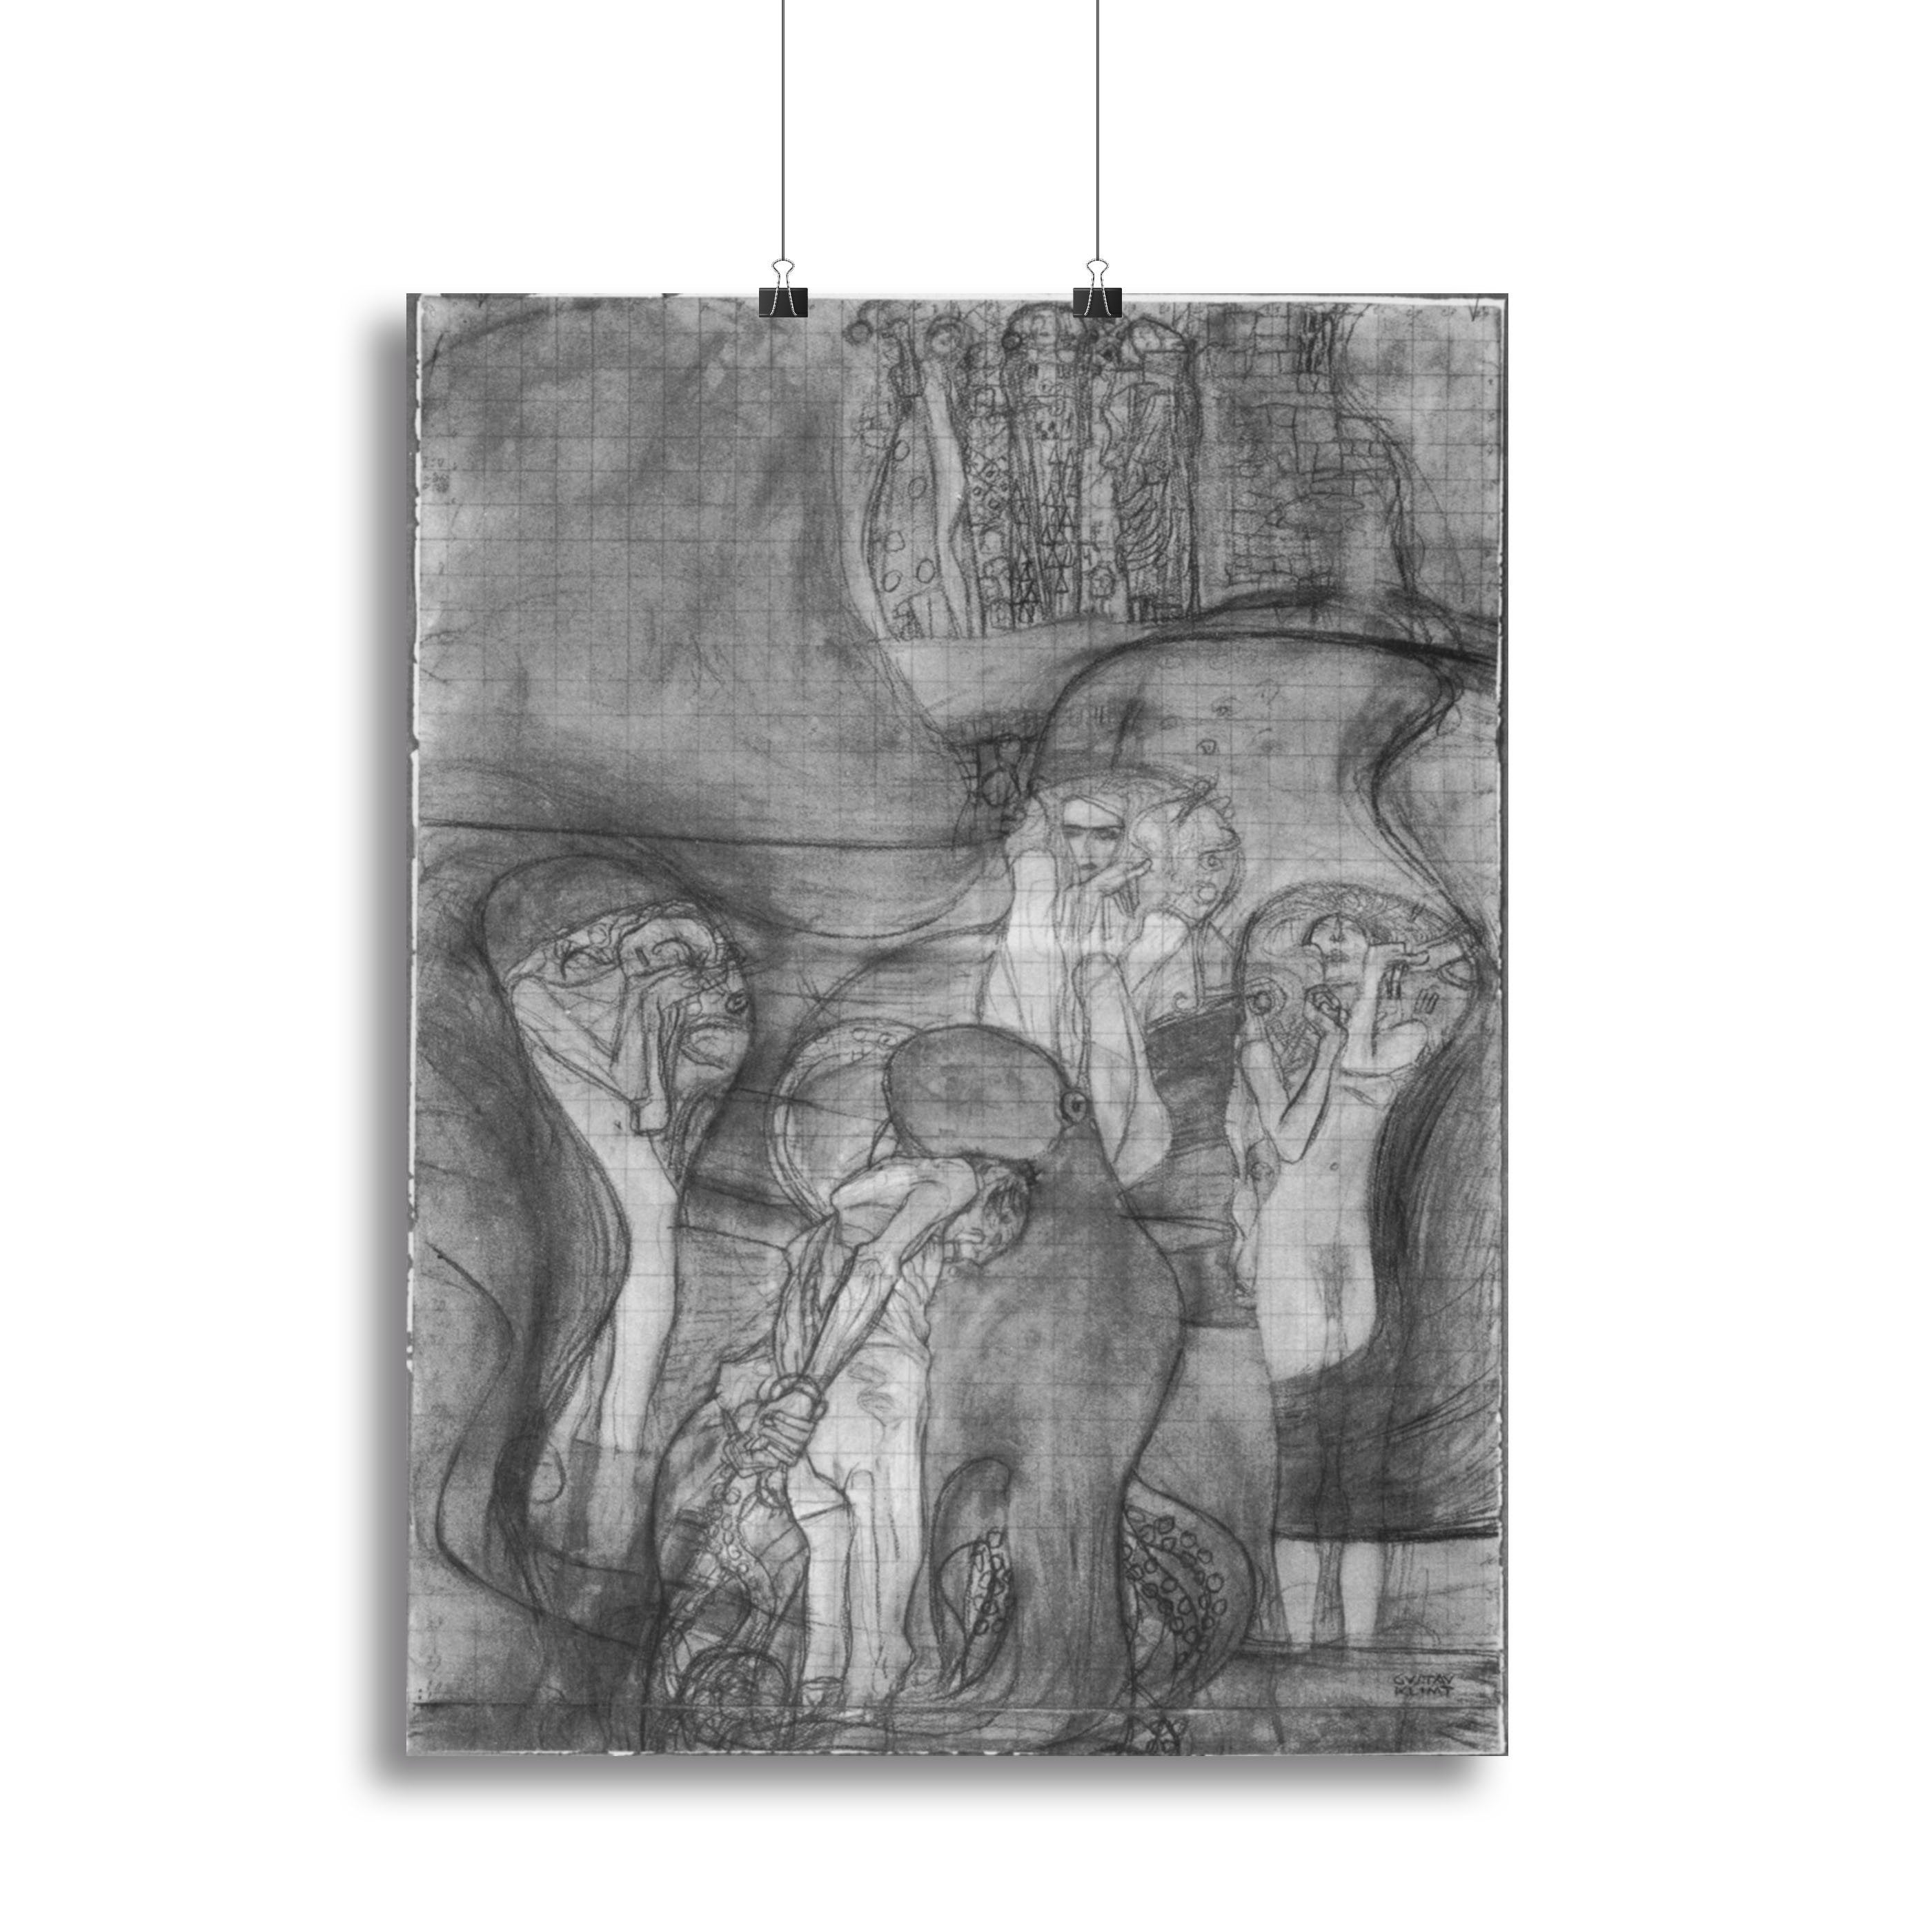 Composition draft of the law faculty image by Klimt Canvas Print or Poster